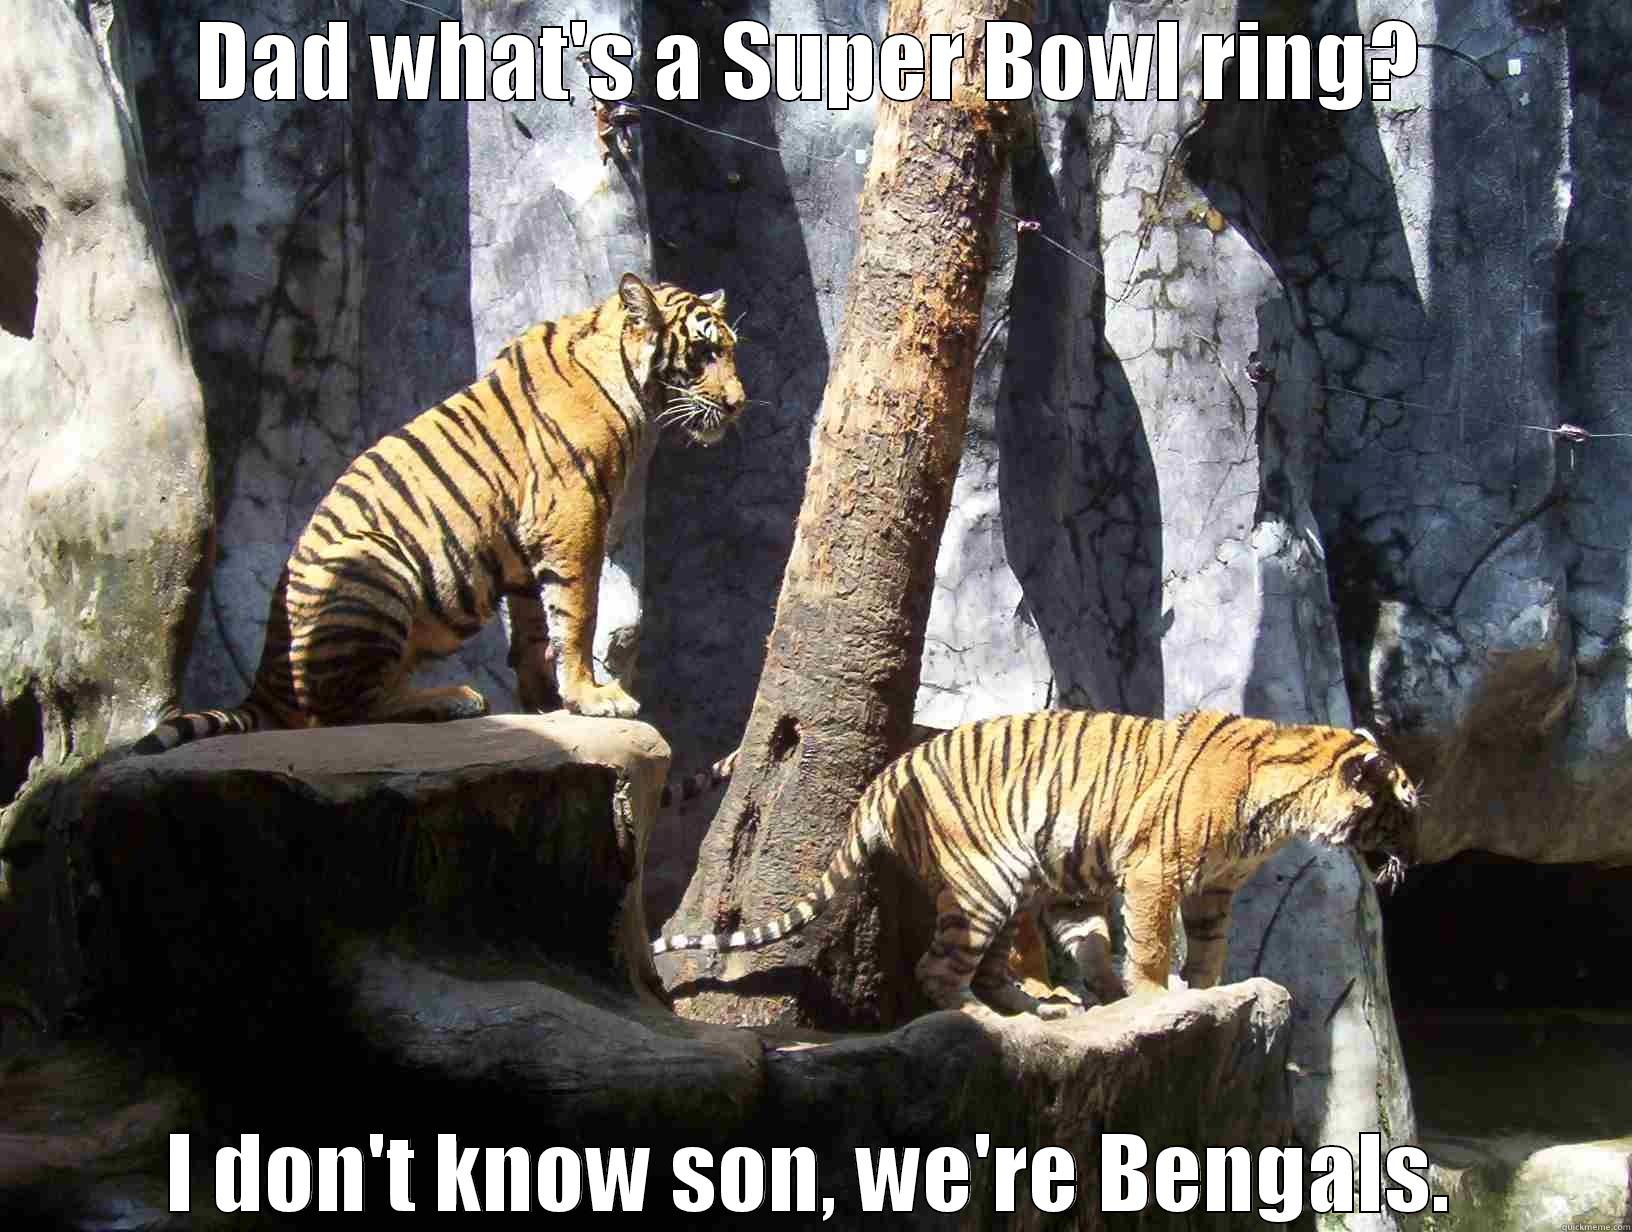 bengals fans - DAD WHAT'S A SUPER BOWL RING? I DON'T KNOW SON, WE'RE BENGALS. Misc